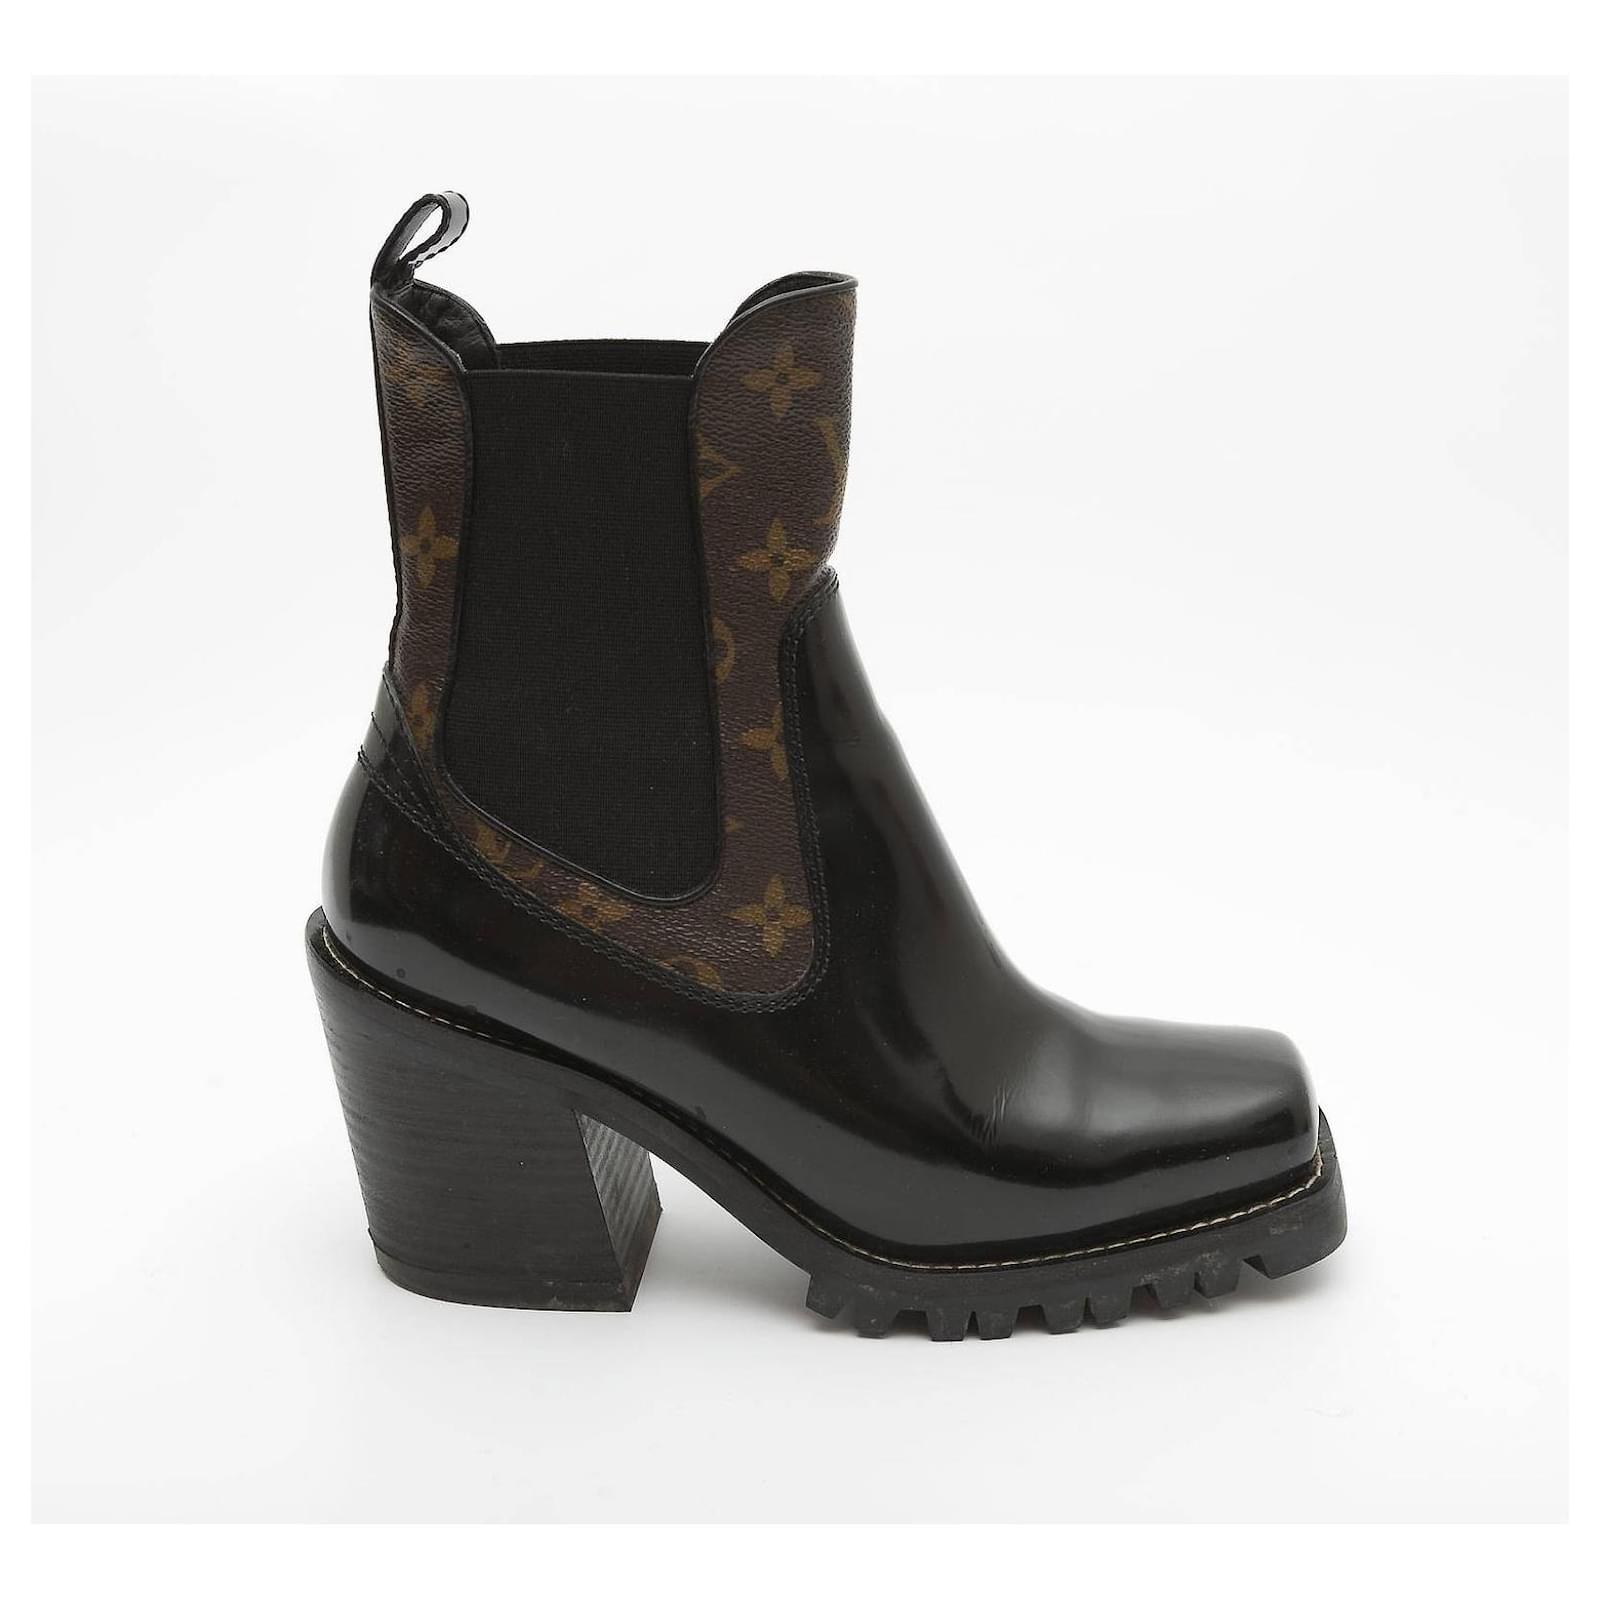 Women's Limitless Ankle Boot, LOUIS VUITTON